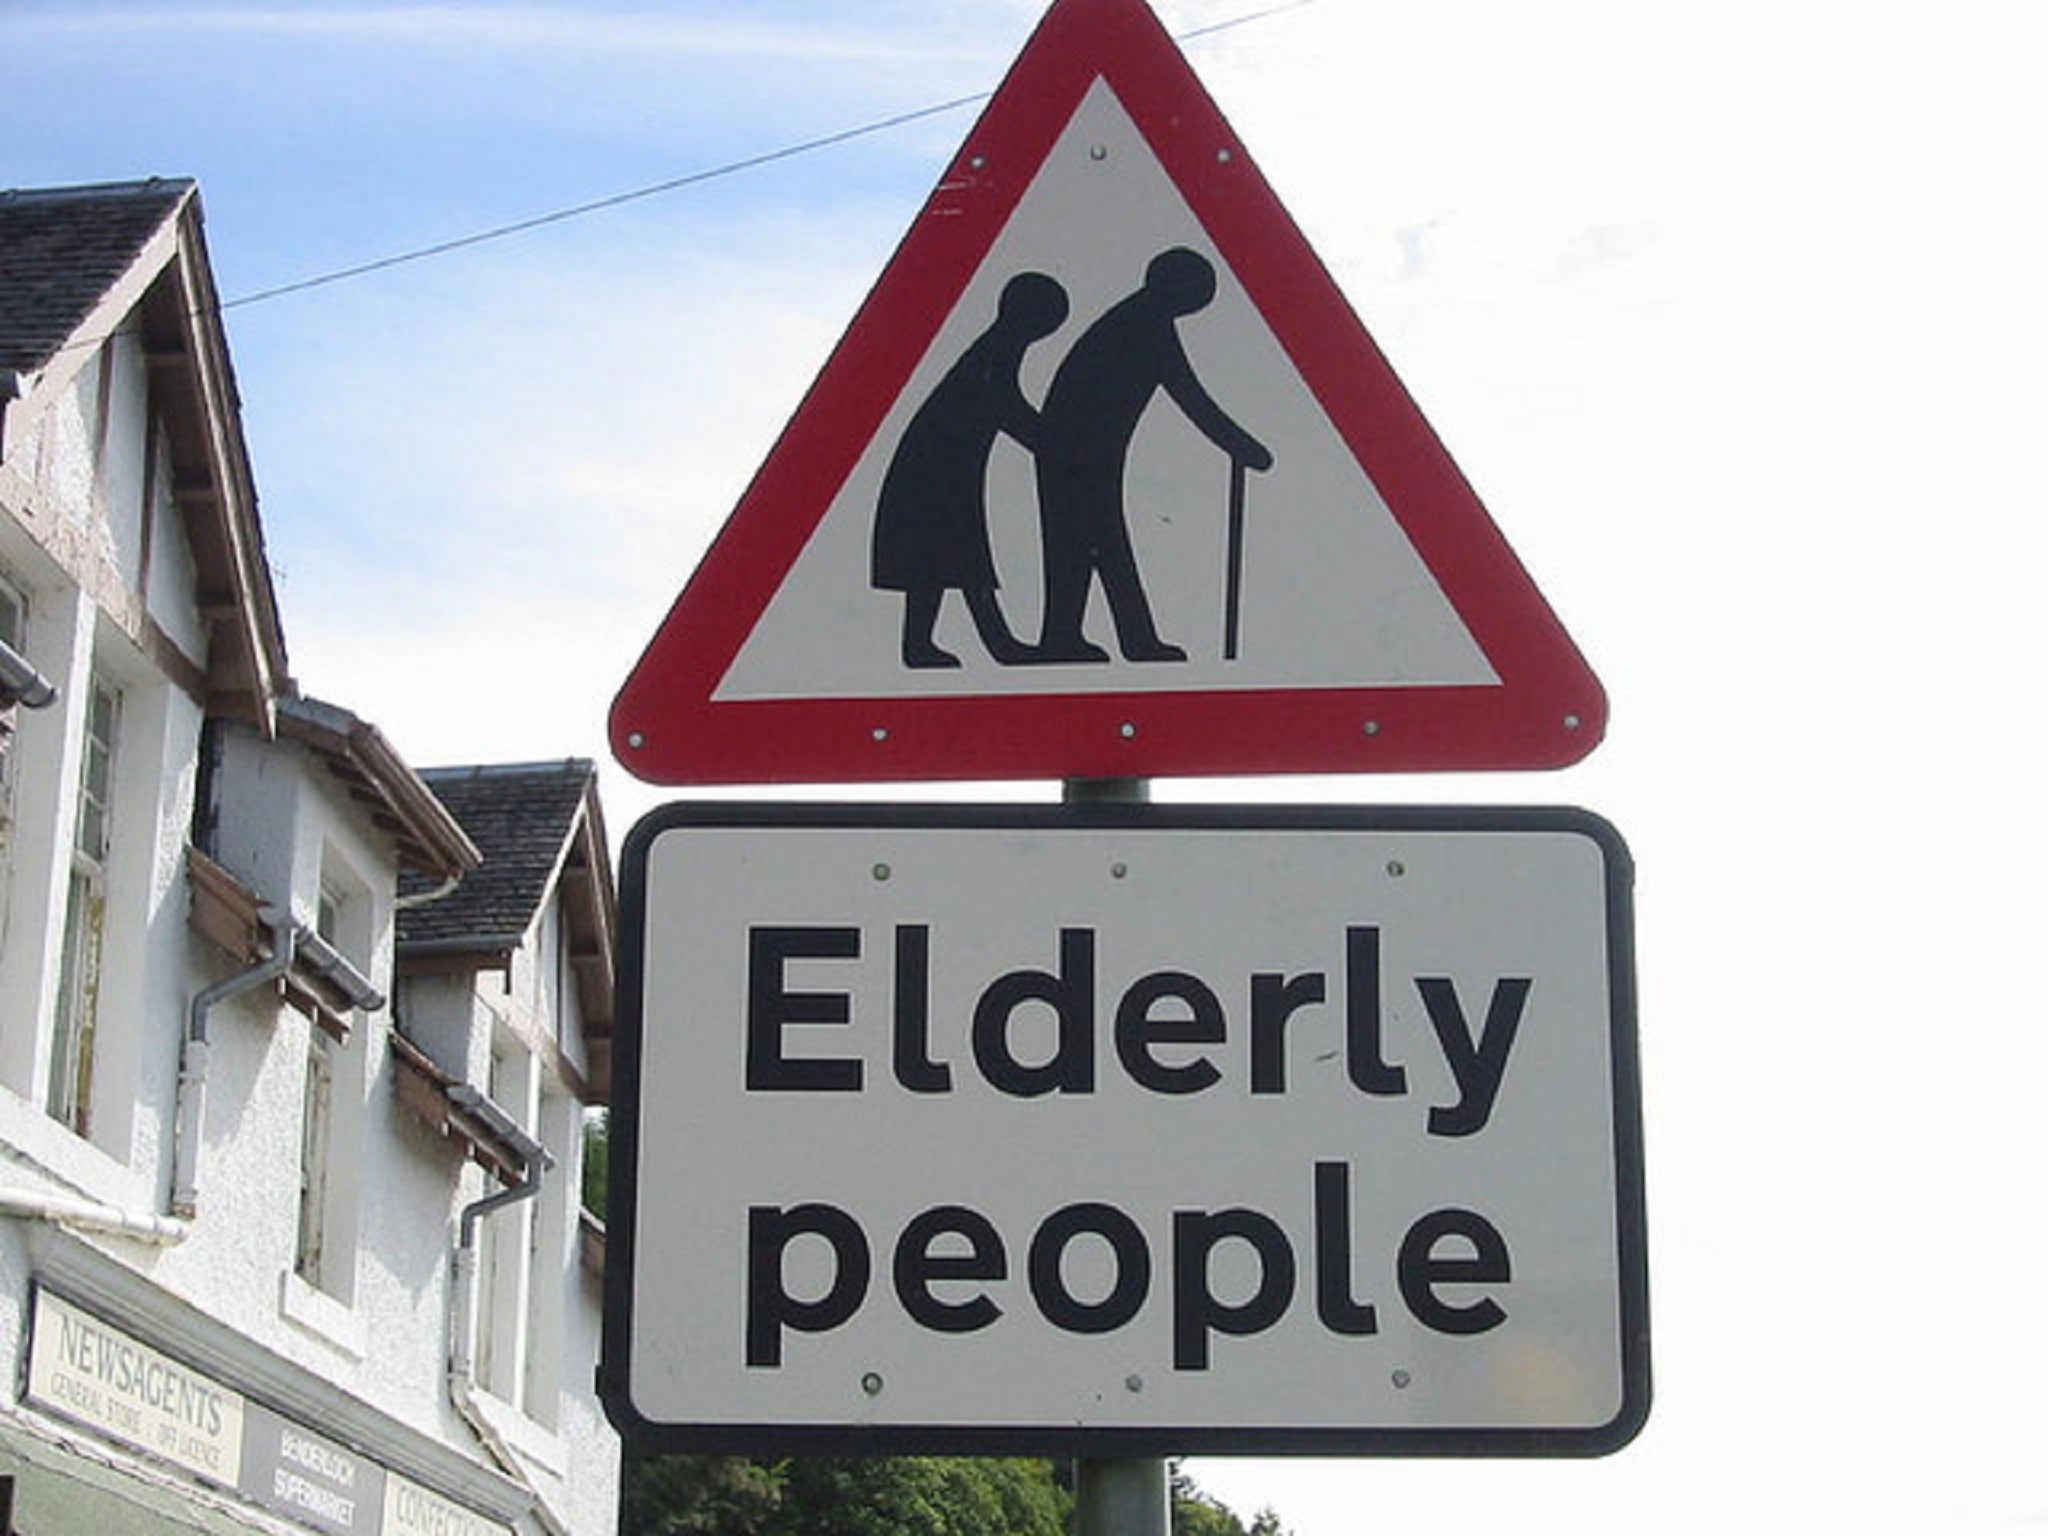 The sign that is said by Dr Ros Altmann to depict older people inaccurately